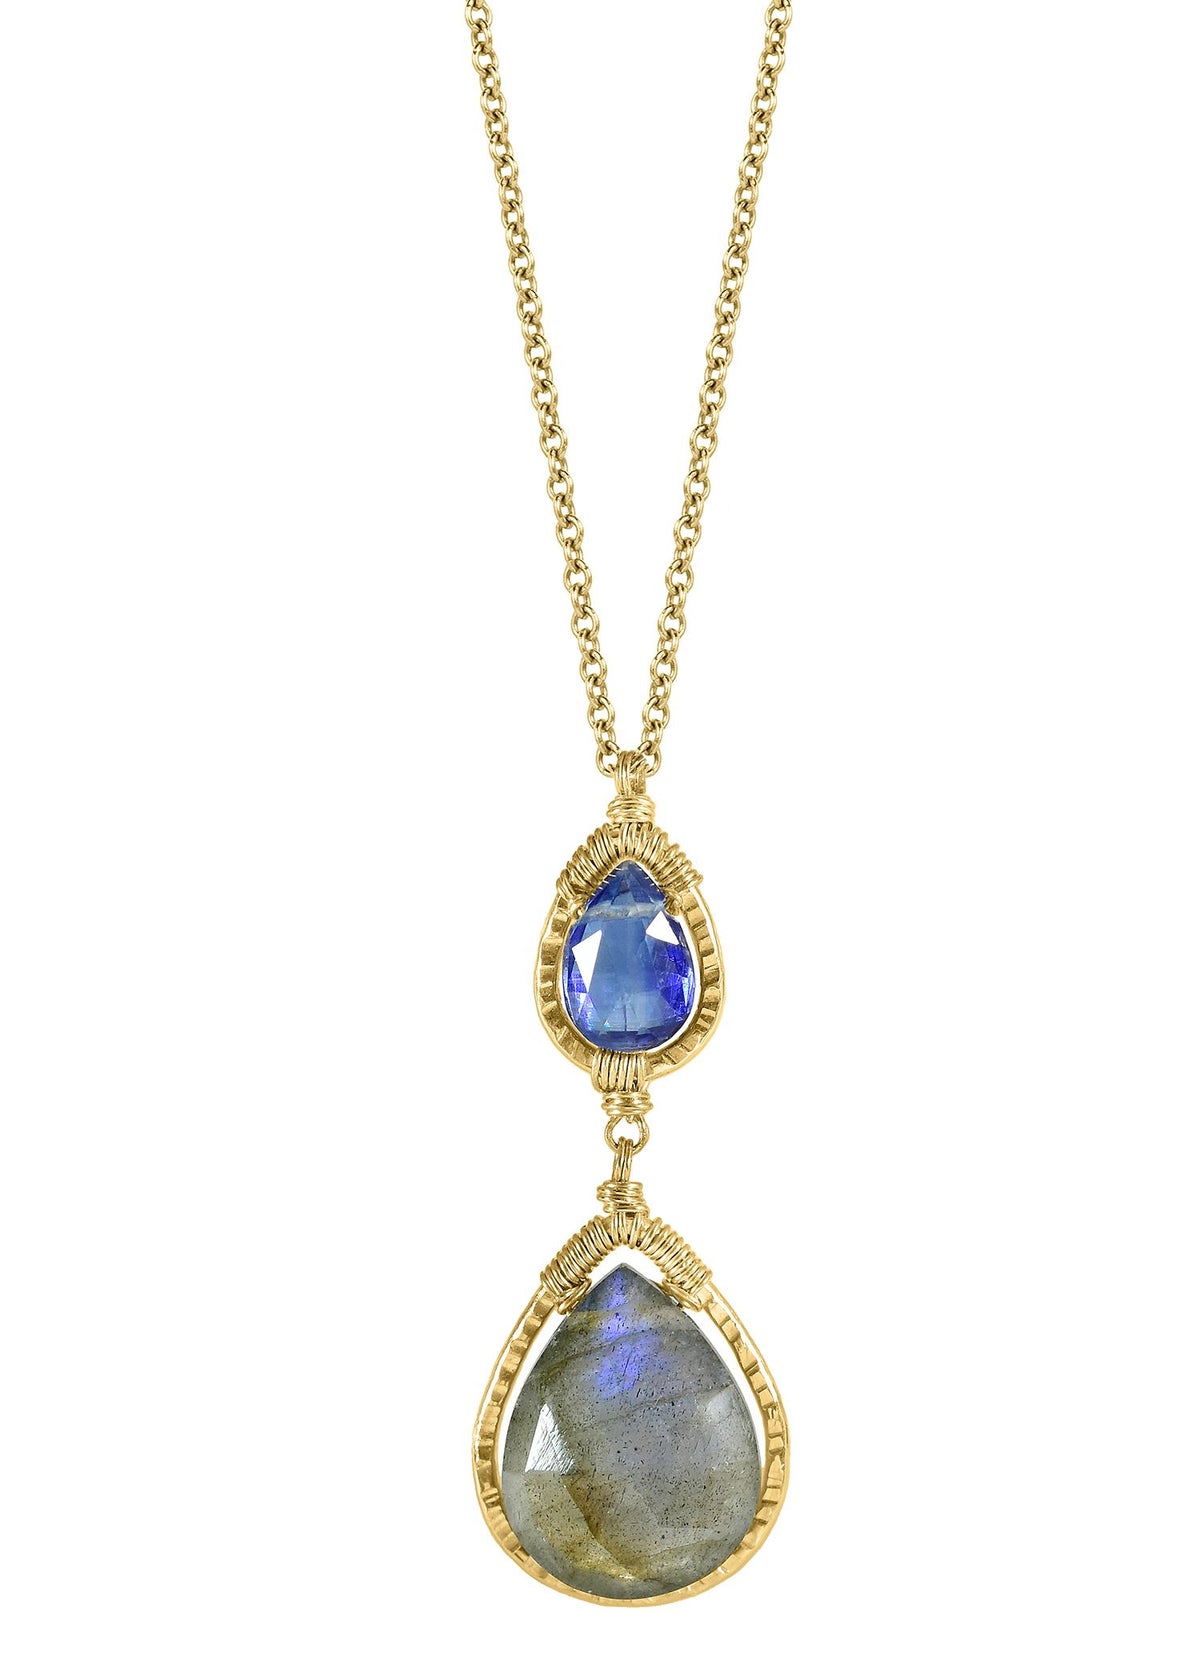 Labradorite Kyanite 14k gold fill Necklace measures 17-1/8&quot; in length Pendant measures 1-1/4&quot; in length and 1/2&quot; in width Handmade in our Los Angeles studio